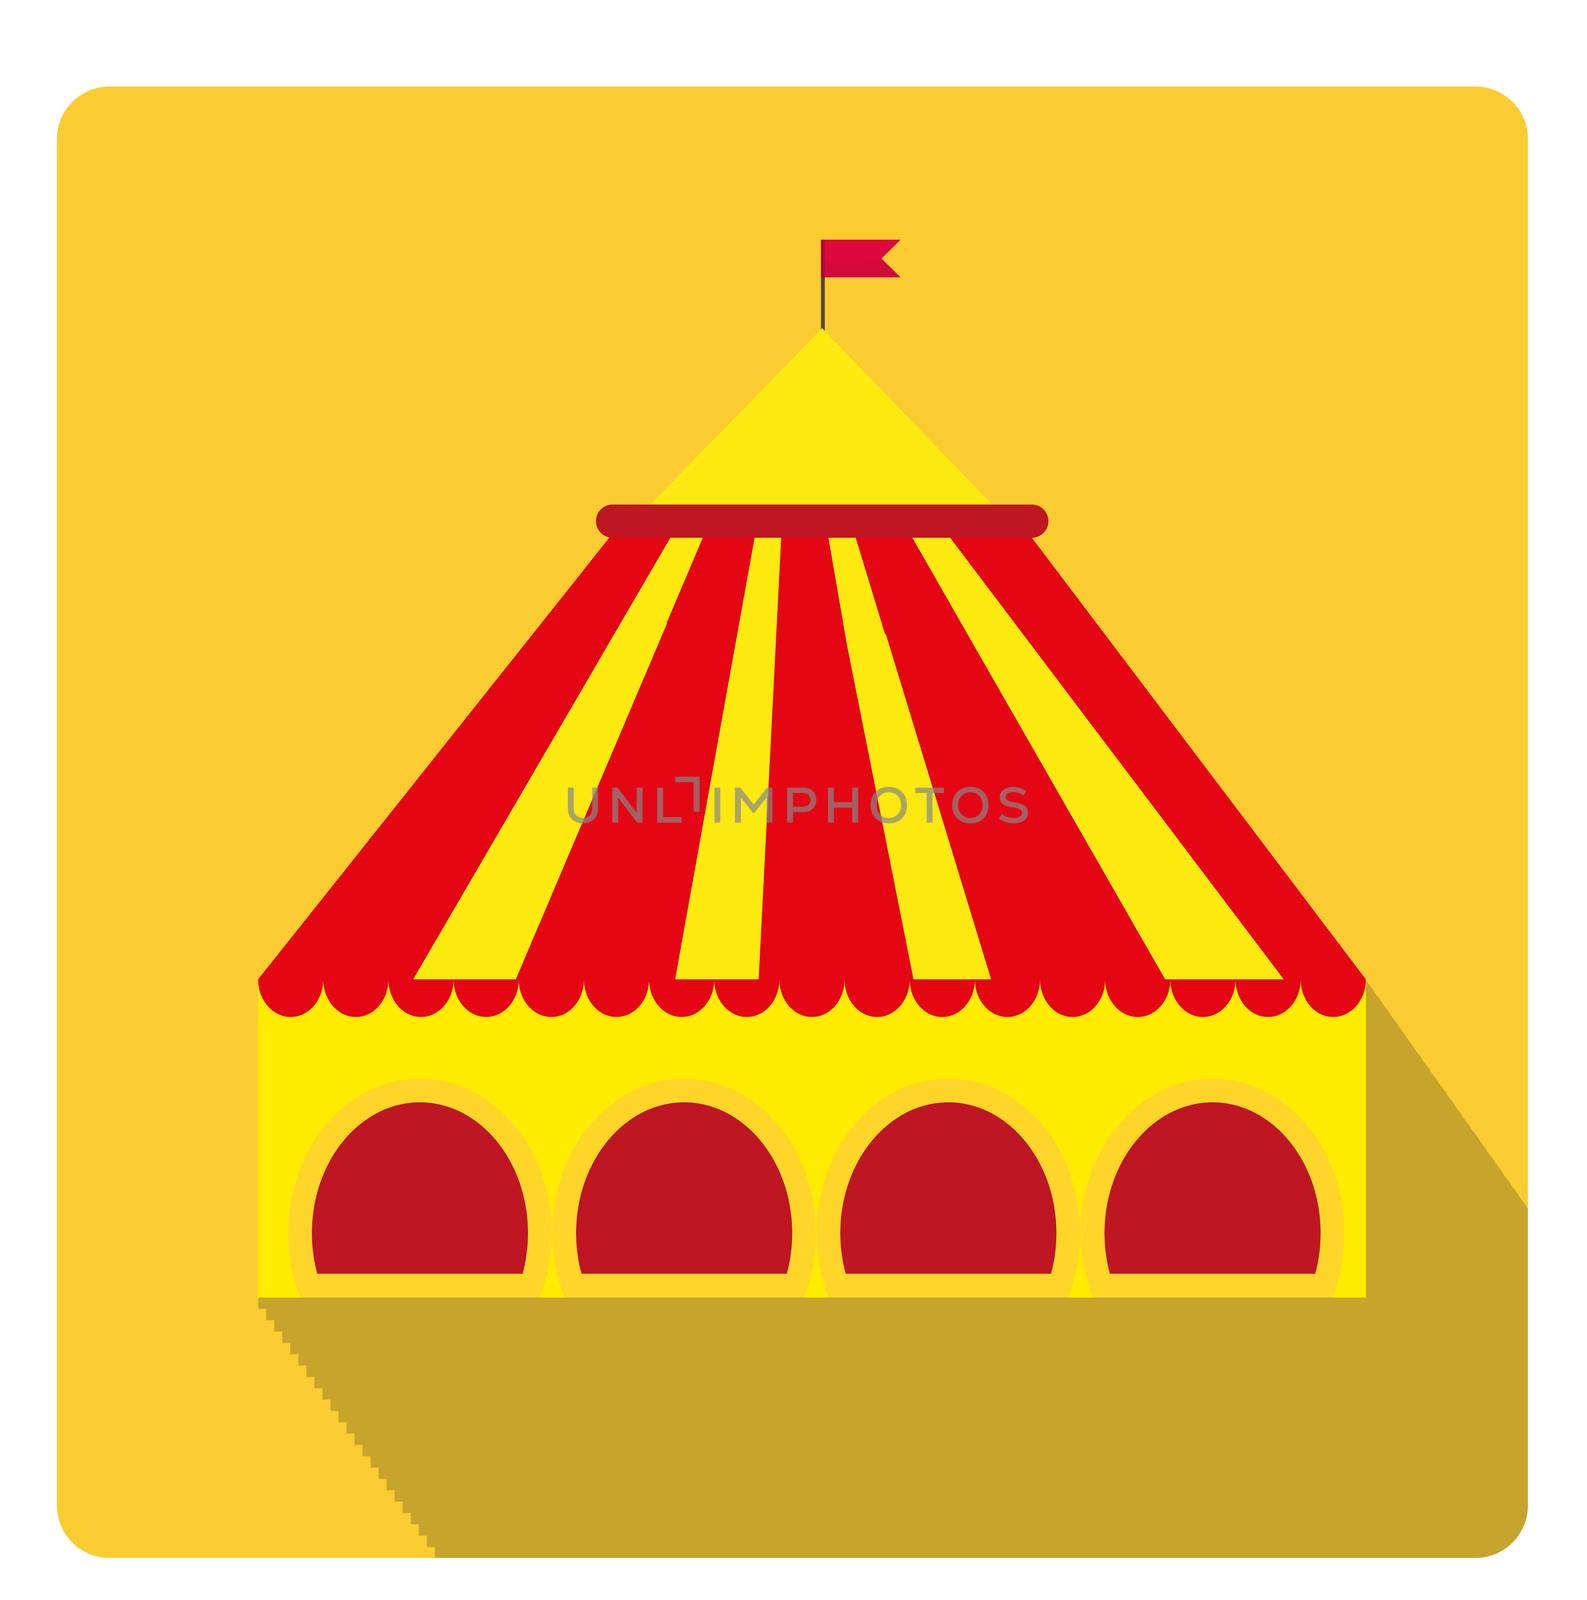 Circus pavilion, yellow tent icon flat style with long shadows, isolated on white background. illustration. by lucia_fox